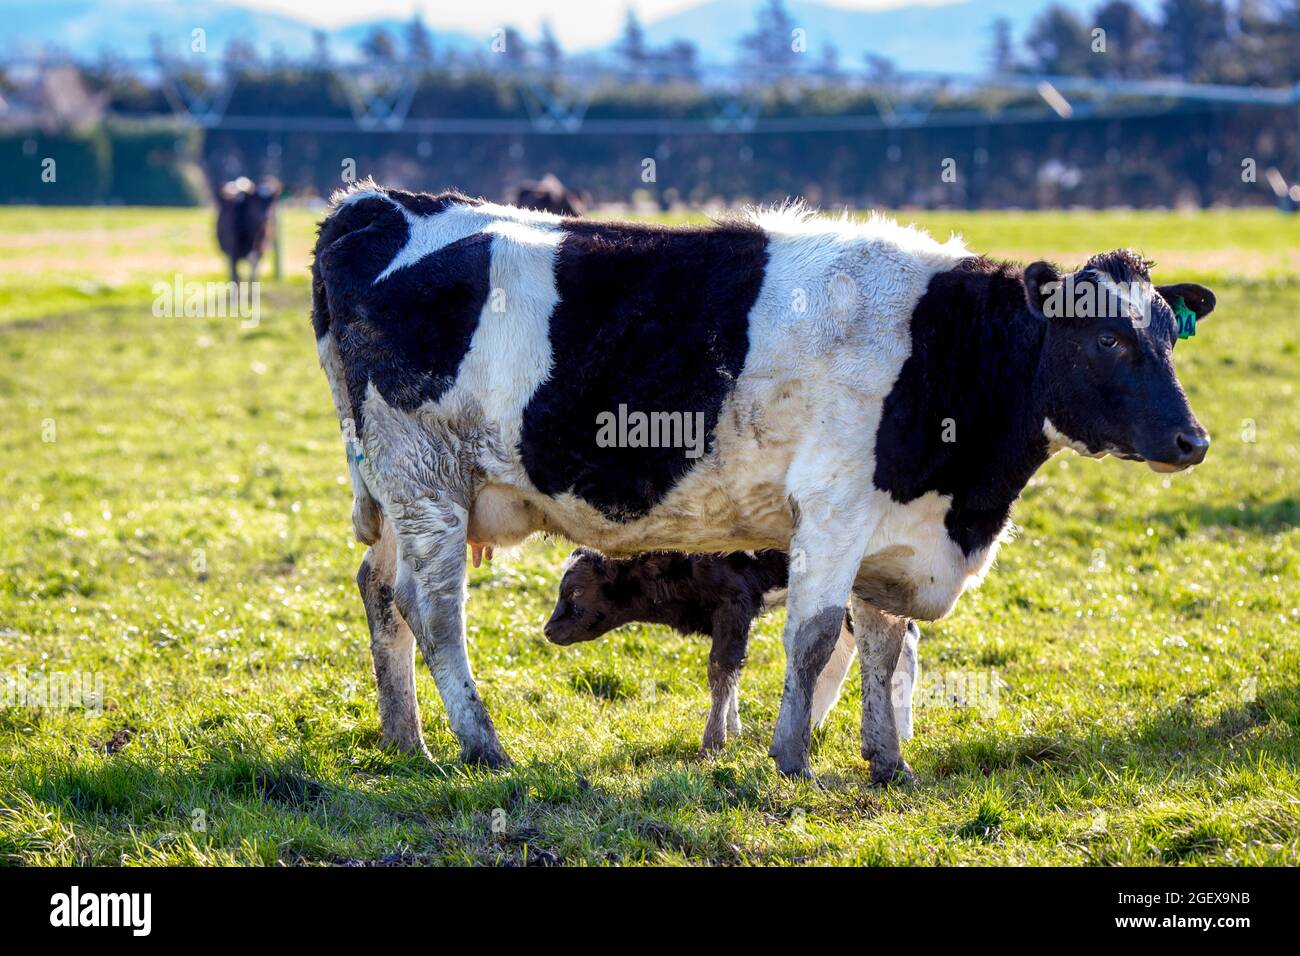 A baby newborn calf looks for his first drink of colostrum from his mother in a field of pregnant dairy cows, Canterbury, New Zealand Stock Photo